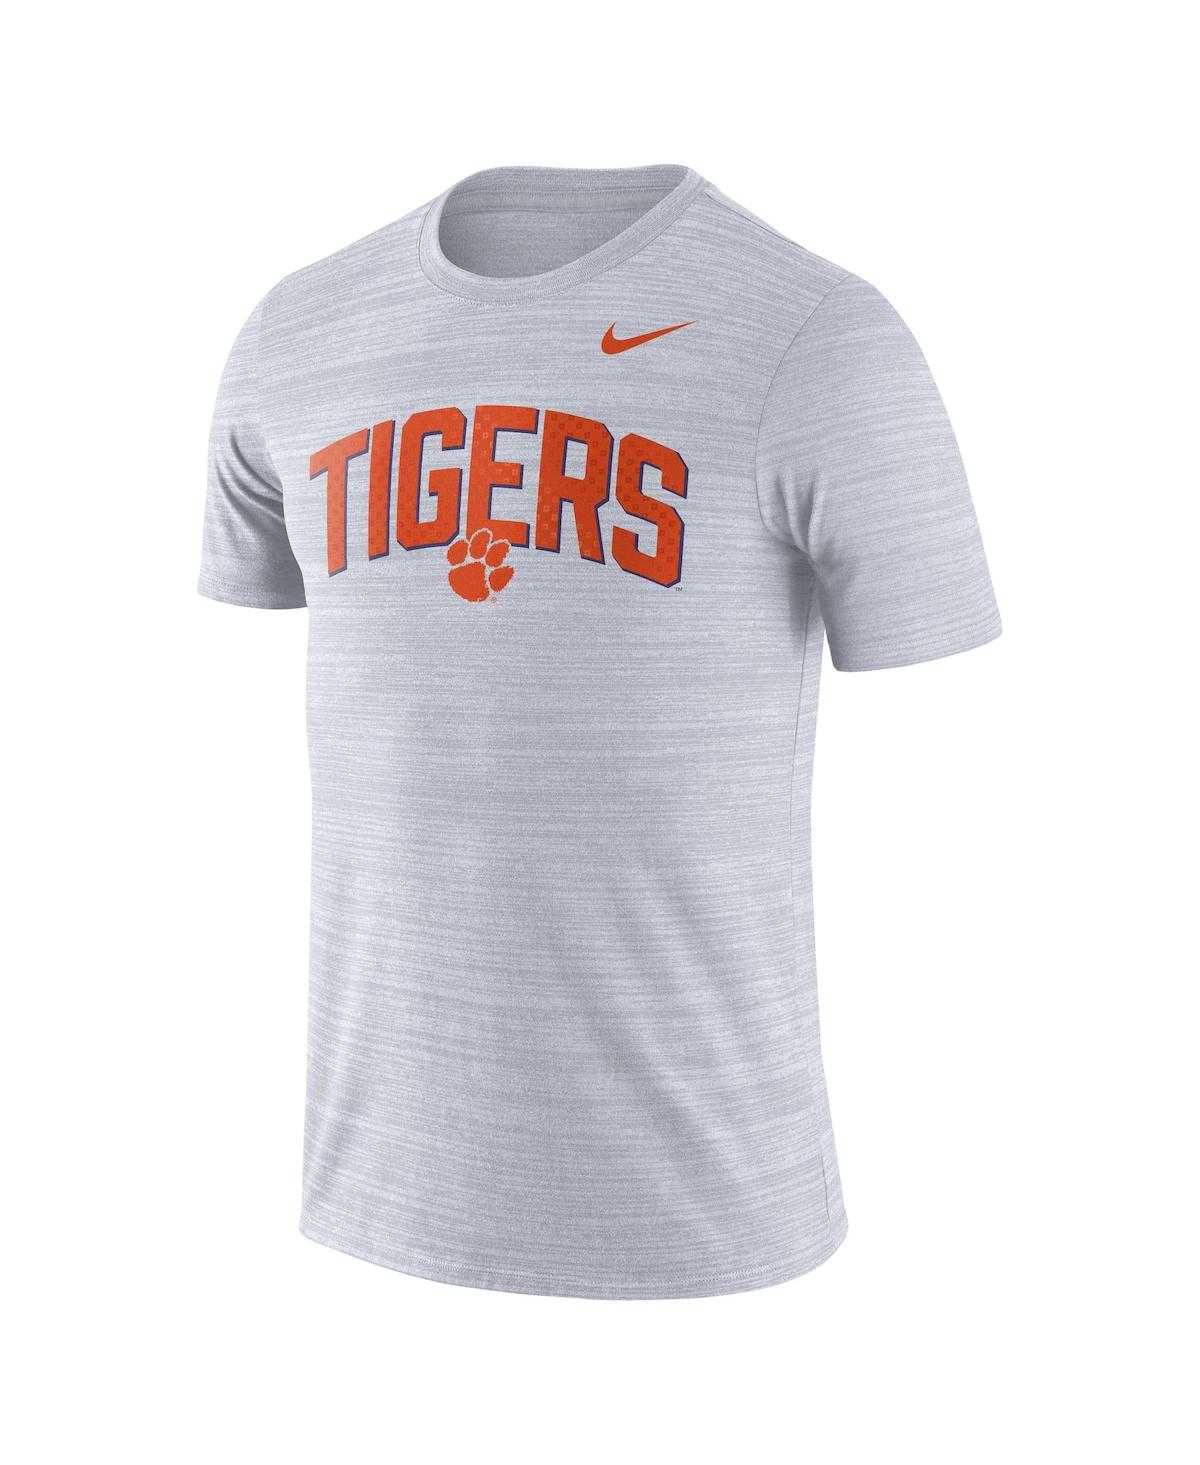 Shop Nike Men's  White Clemson Tigers 2022 Game Day Sideline Velocity Performance T-shirt